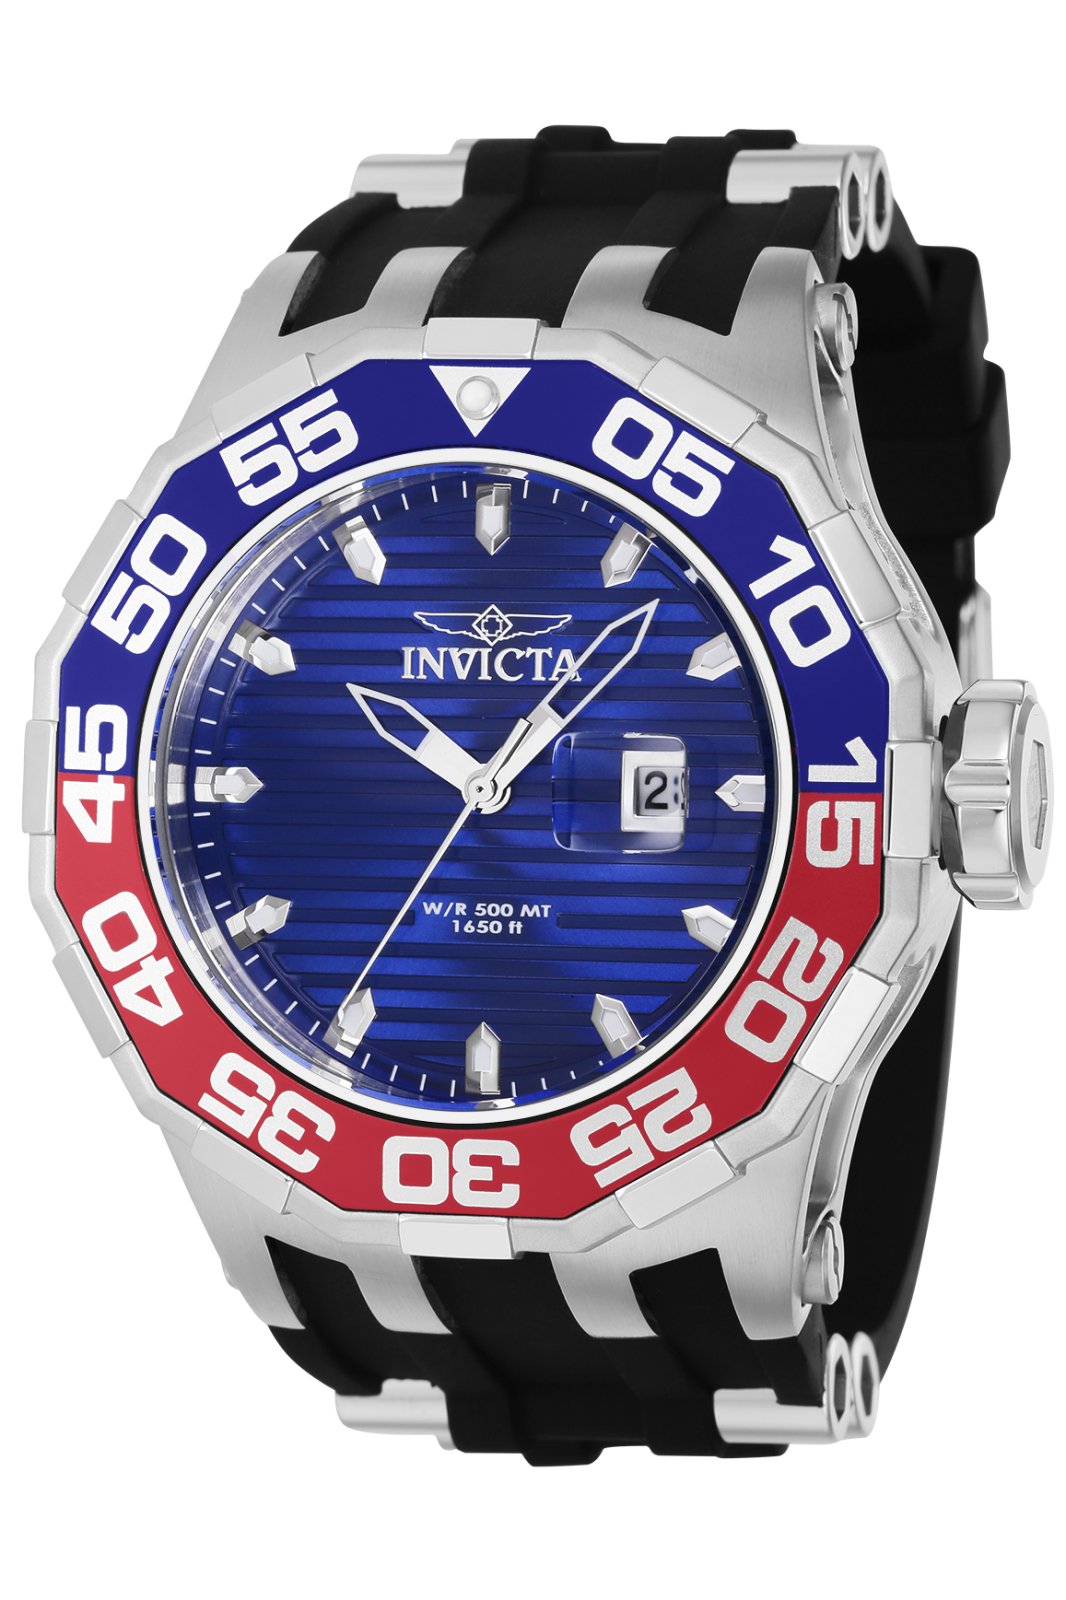 Hombre - Official Invicta Store - Buy Online!